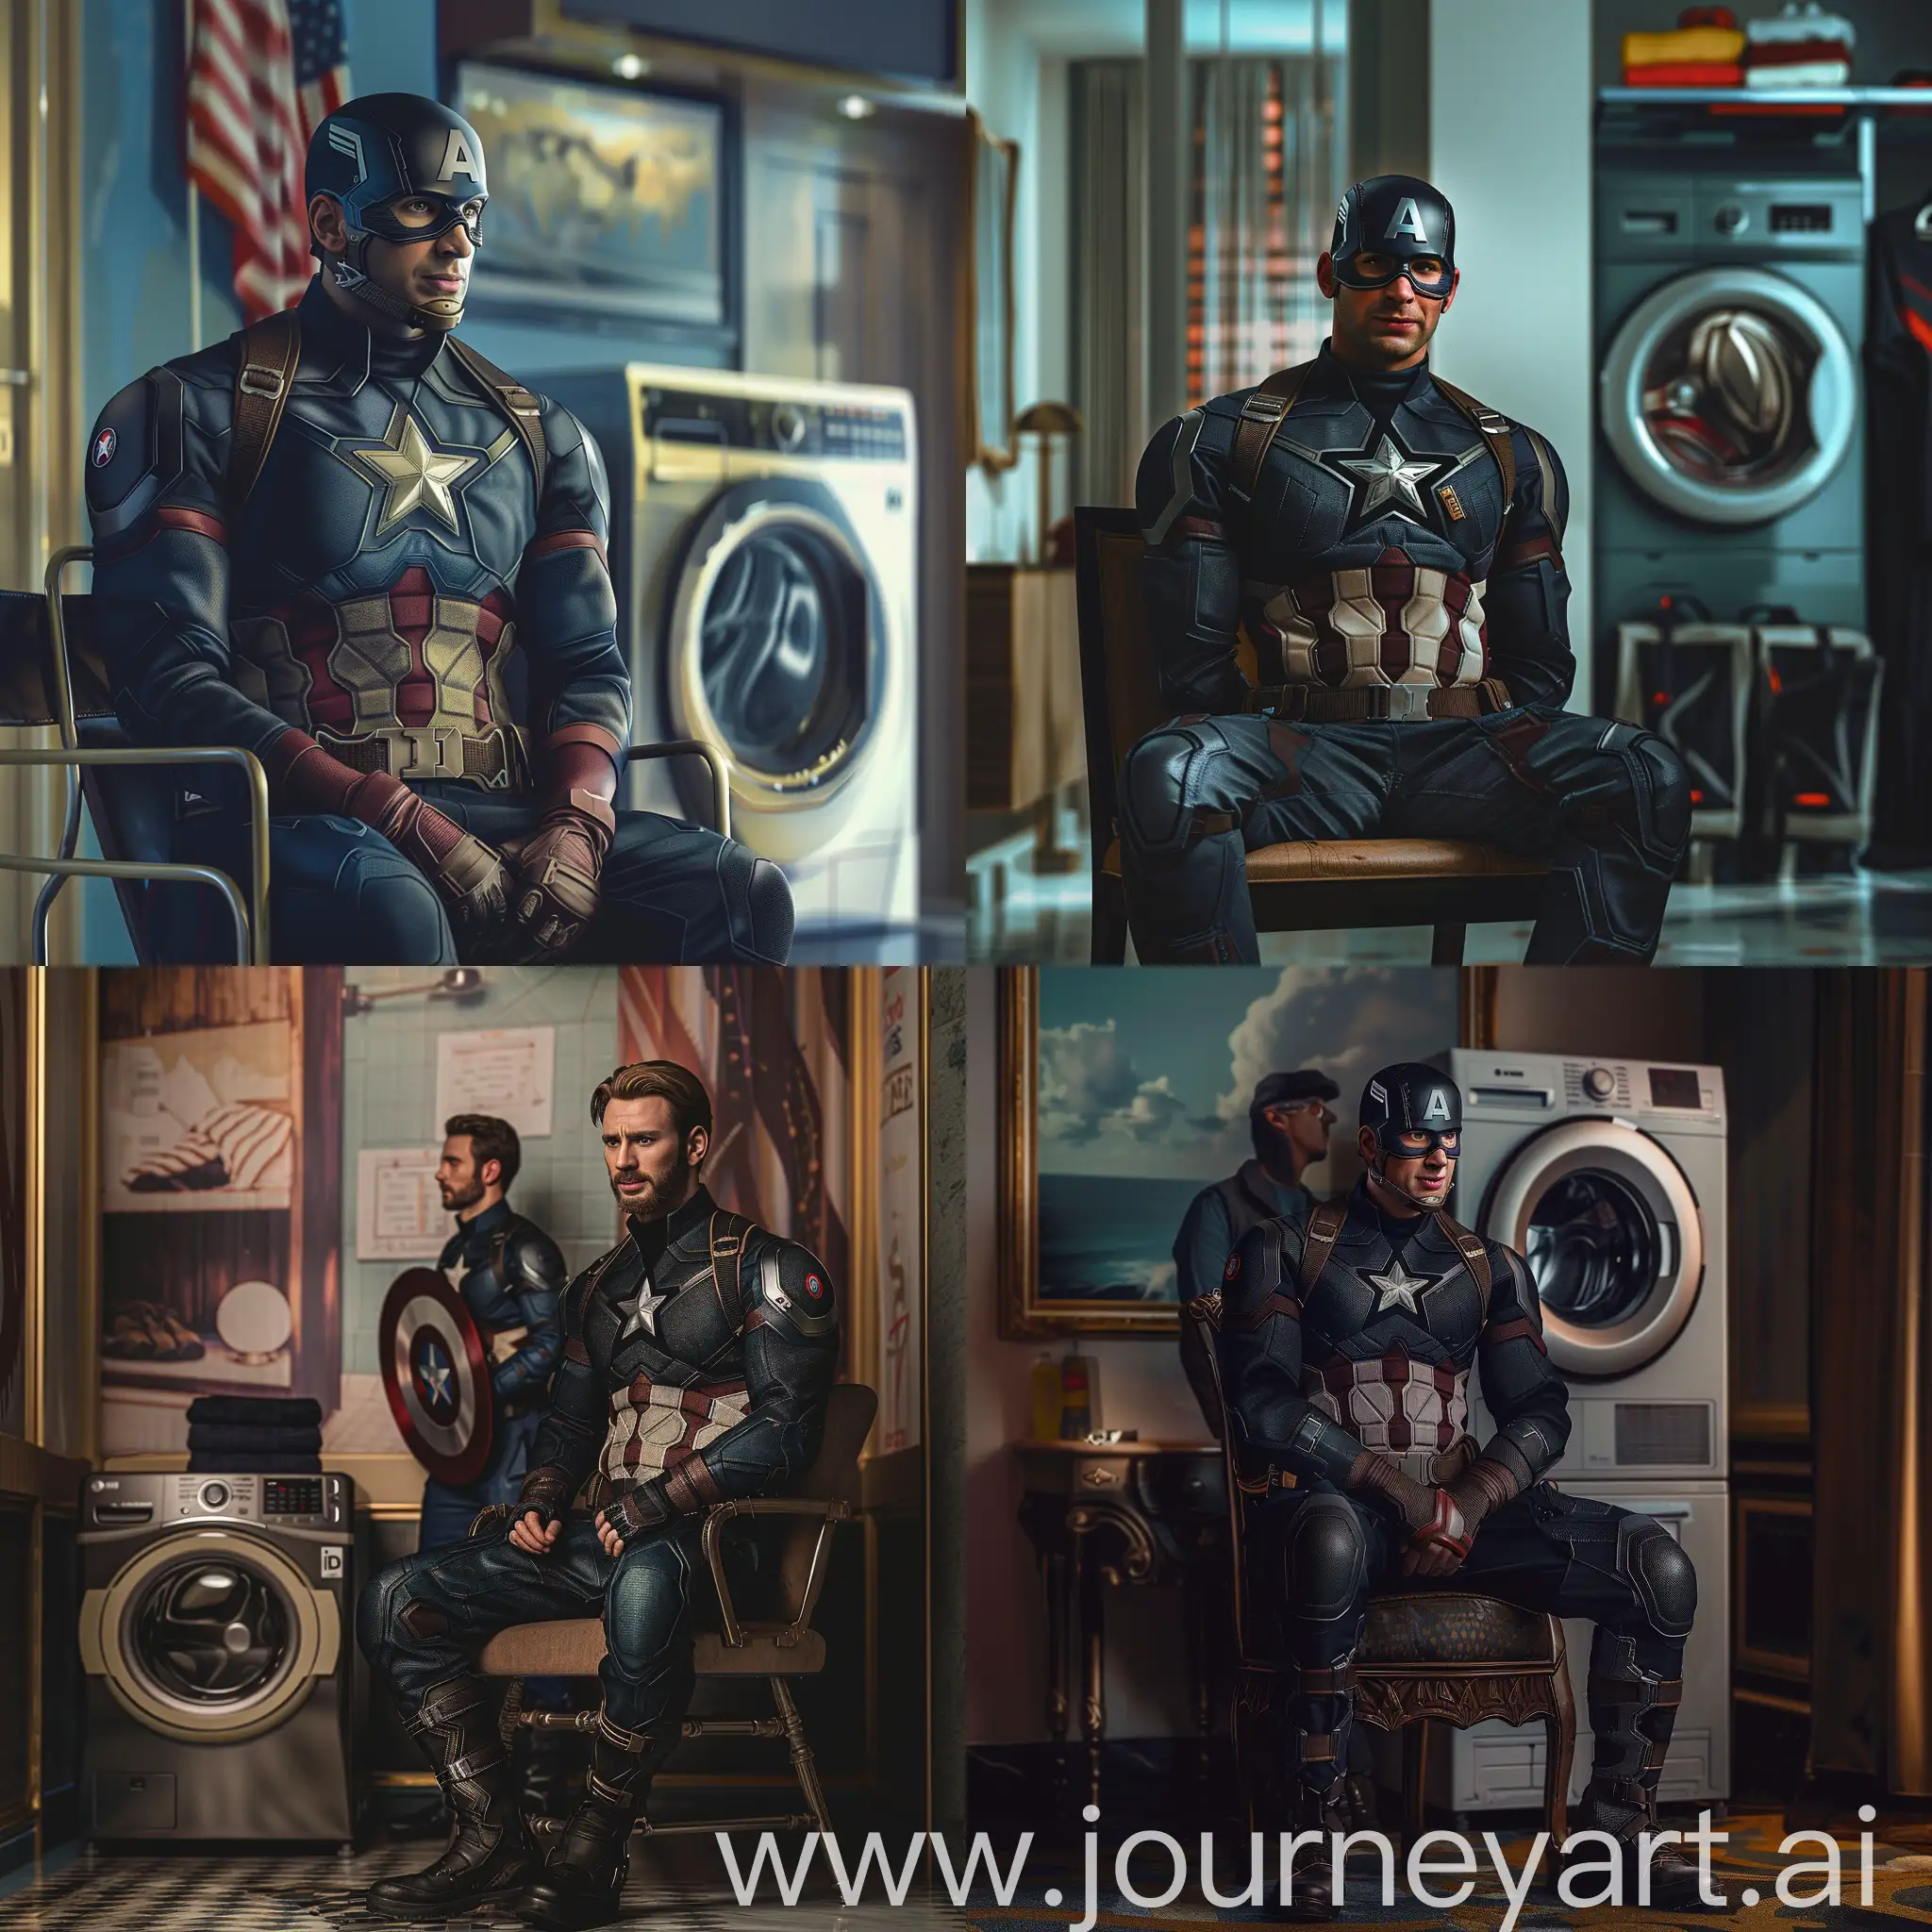 Marvel captain america sitting on a chair waiting for the repairman of his washing machine to finish his work, looking at the camera and smiling. Behind him is an image of a hotel room, high quality, super real, with calm colors